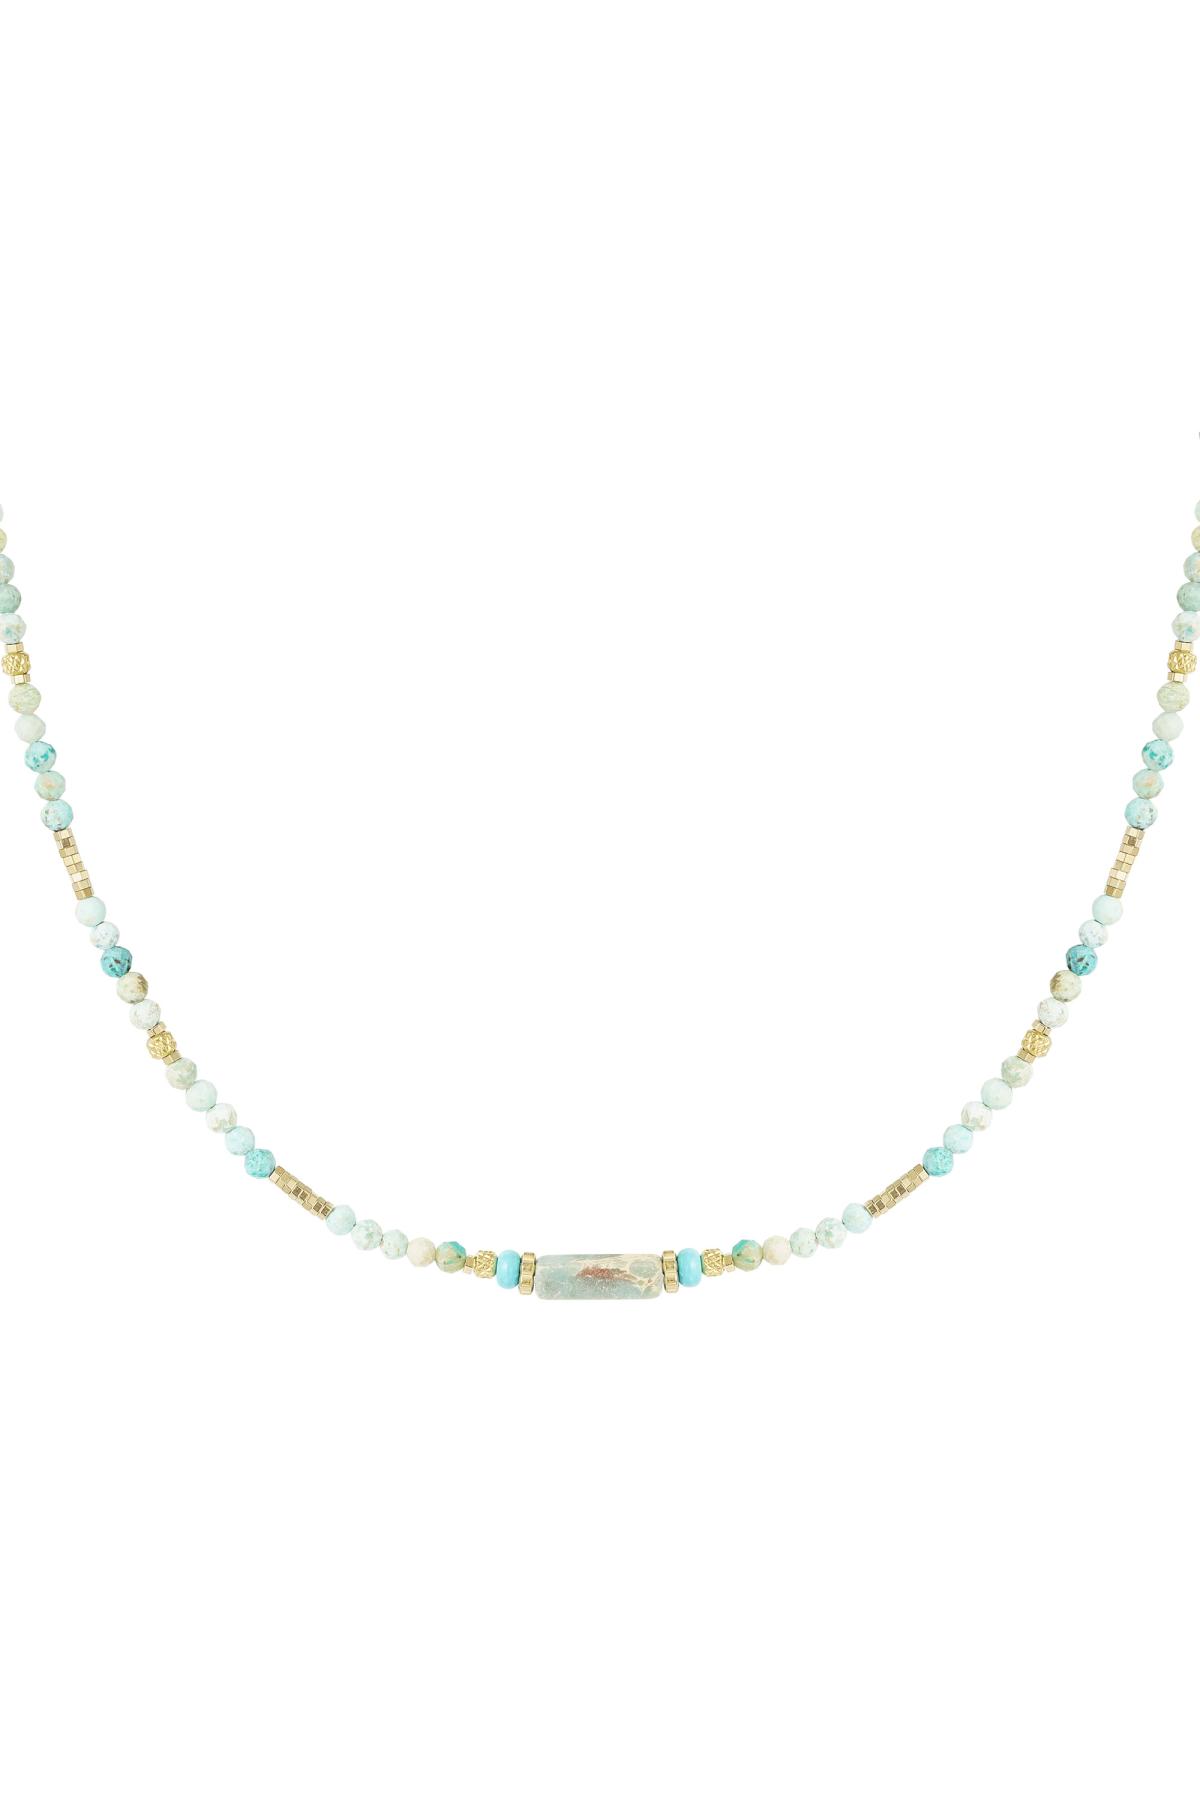 Collana tante perle - Collezione pietre naturali Turquoise & Gold Stainless Steel h5 